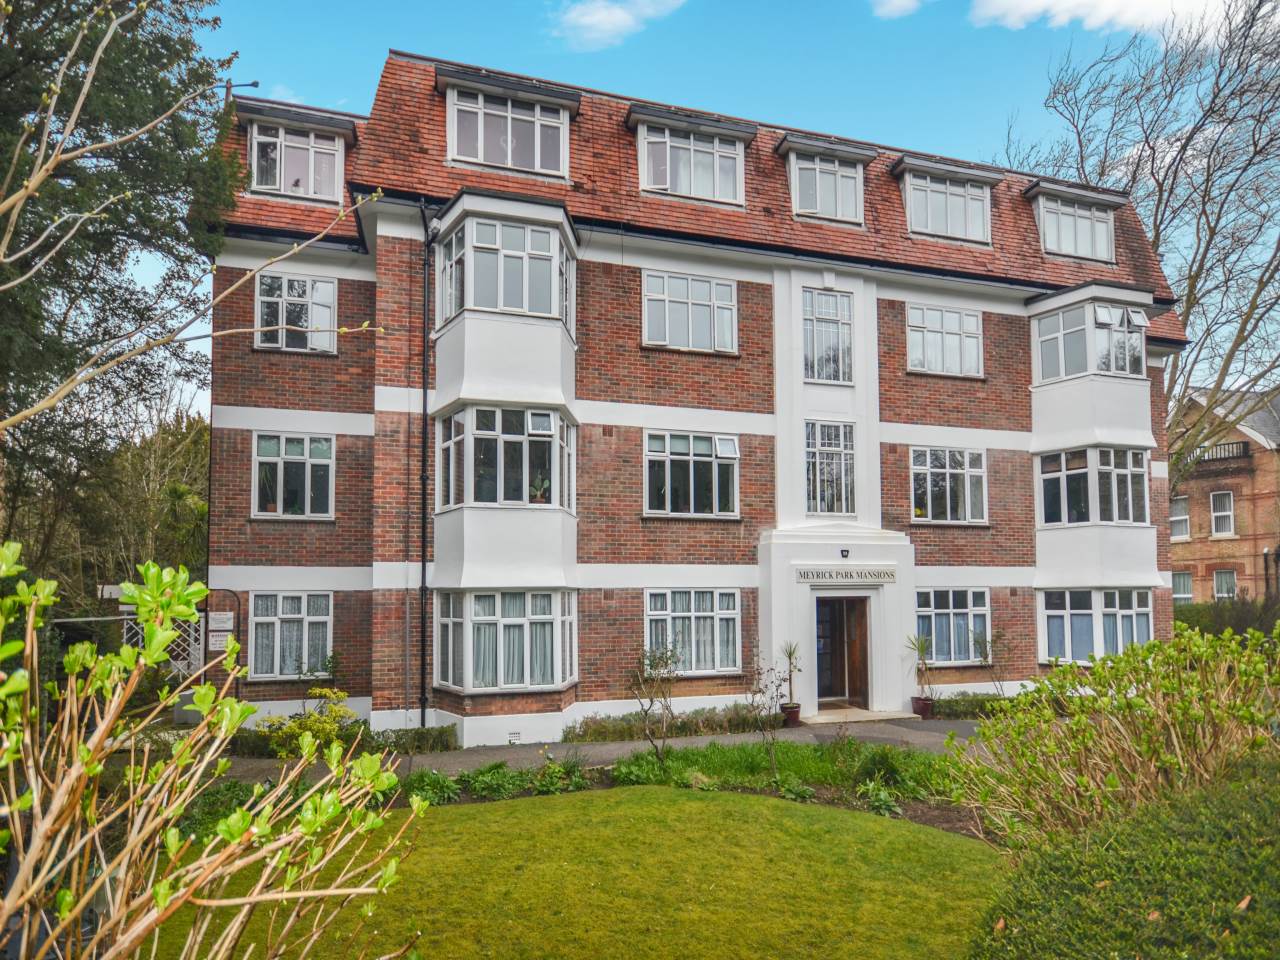 EXCEPTIONAL AND STYLISH* 2 BEDROOM ART DECO APARTMENT* MODERN KITCHEN AND BATHROOM* ALLOCATED PARKING* SECOND FLOOR WITH LIFT* SPACIOUS LIVNG ROOM* NO CHAIN!!